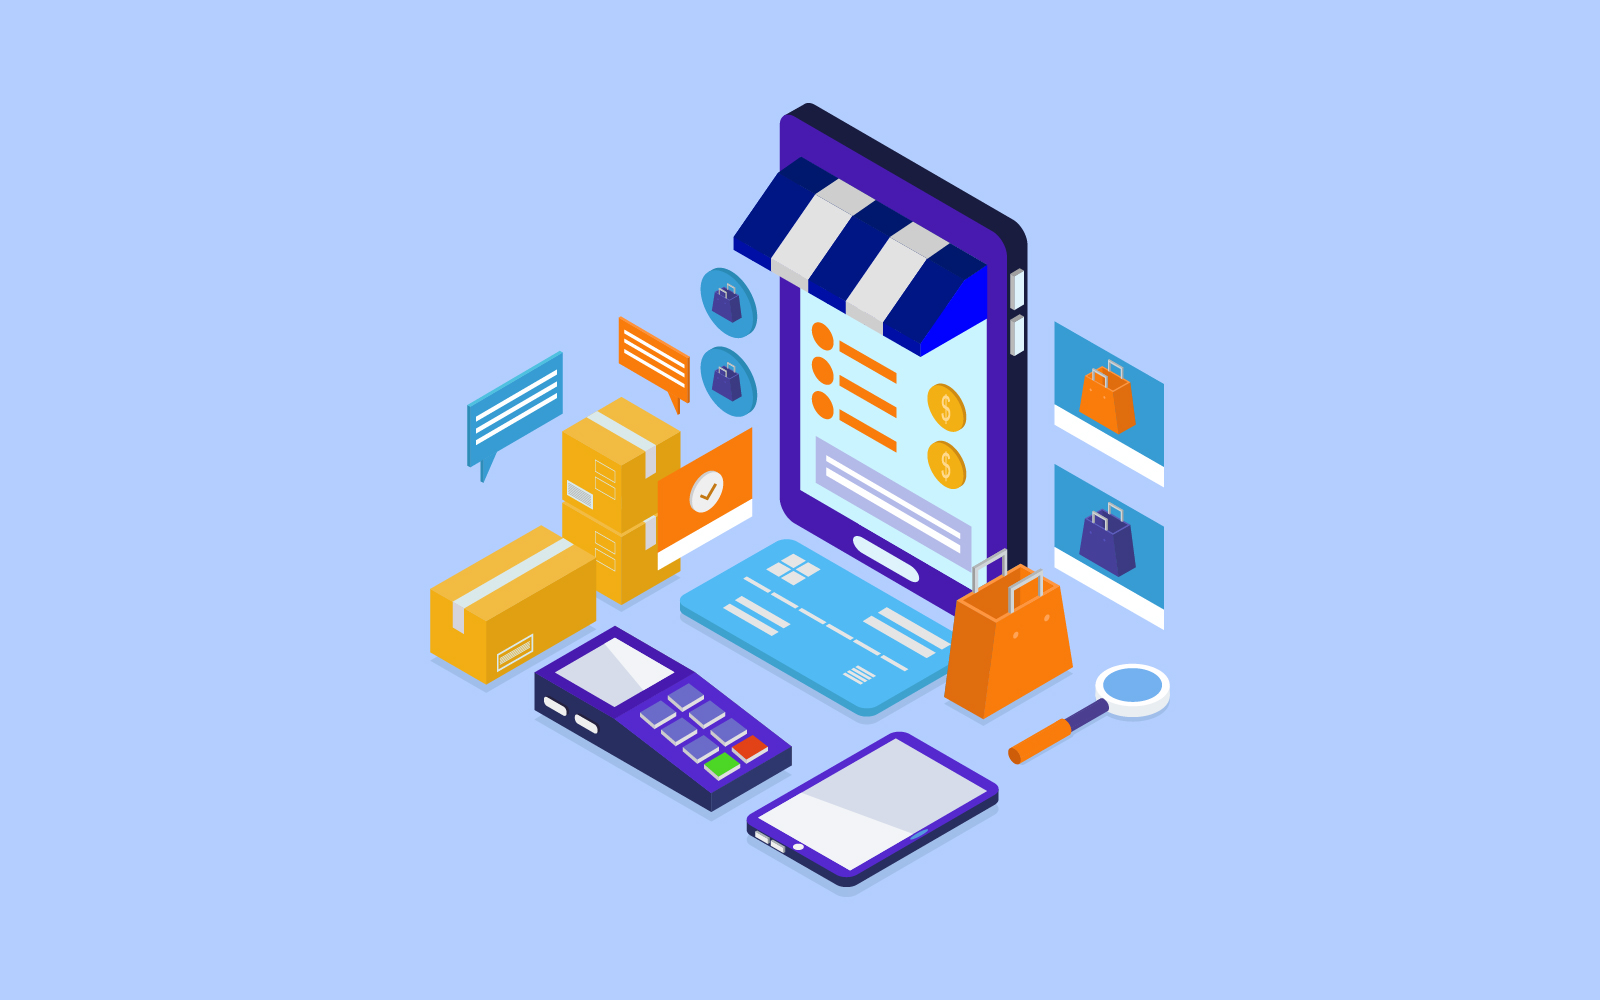 Online shopping isometric illustrated in vector on a white background